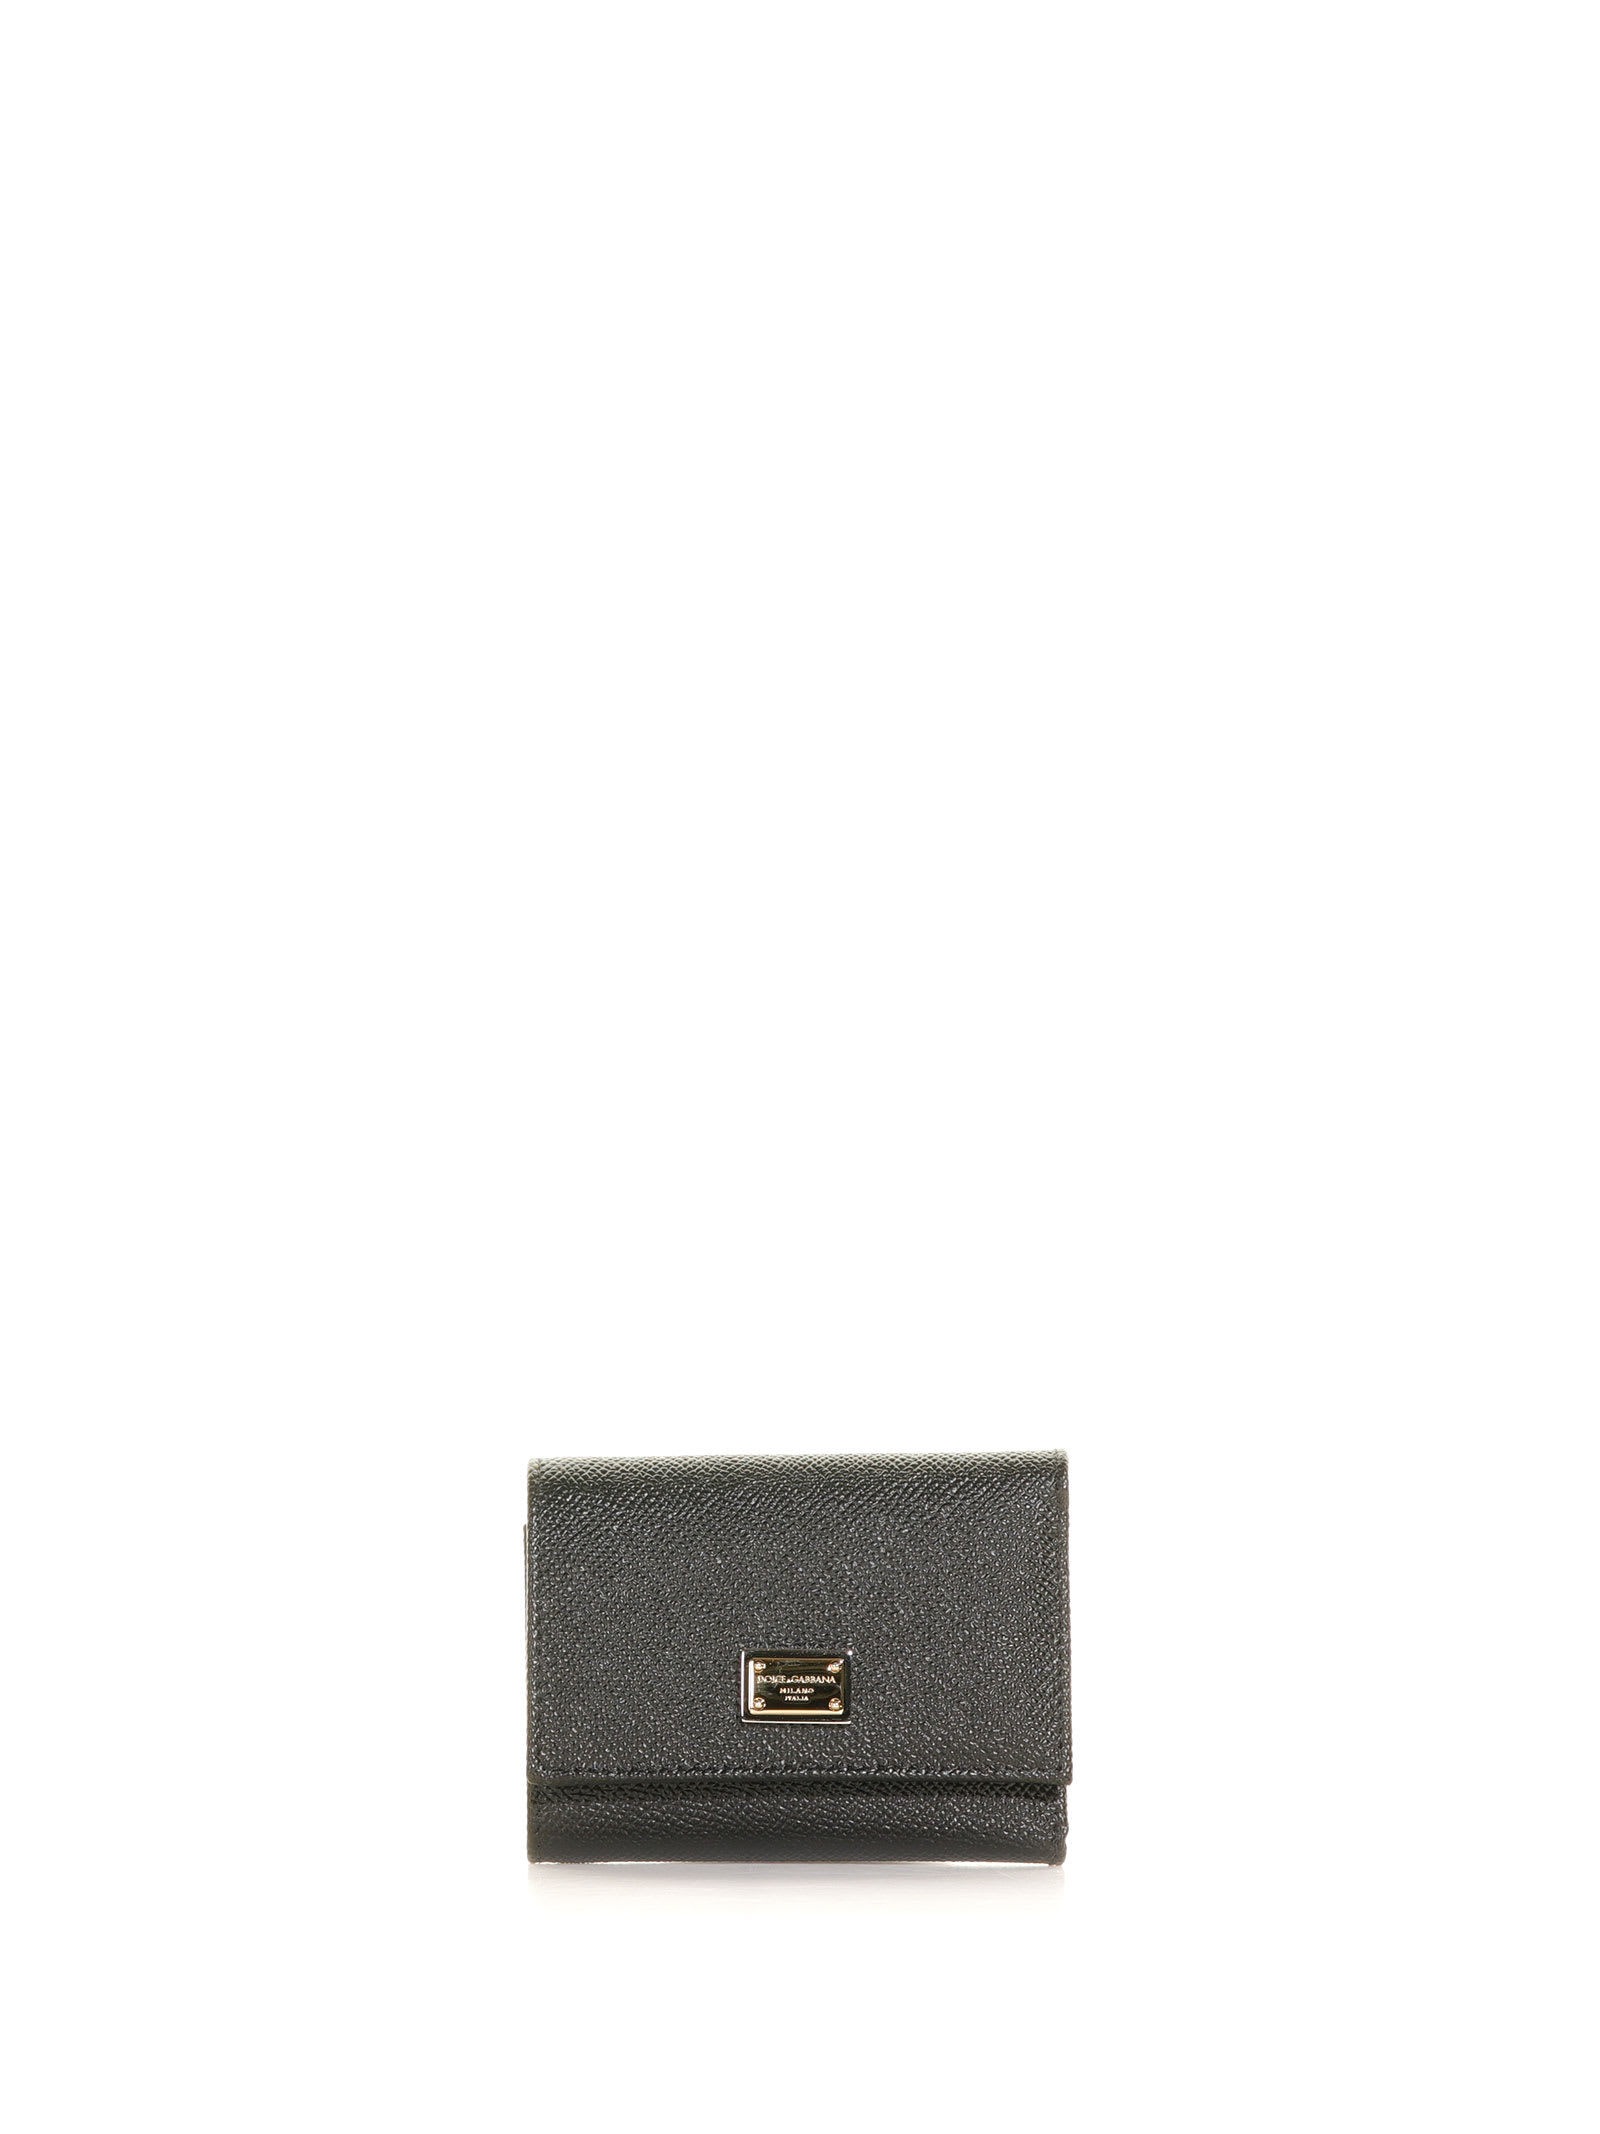 DOLCE & GABBANA SMALL LEATHER CONTINENTAL WALLET